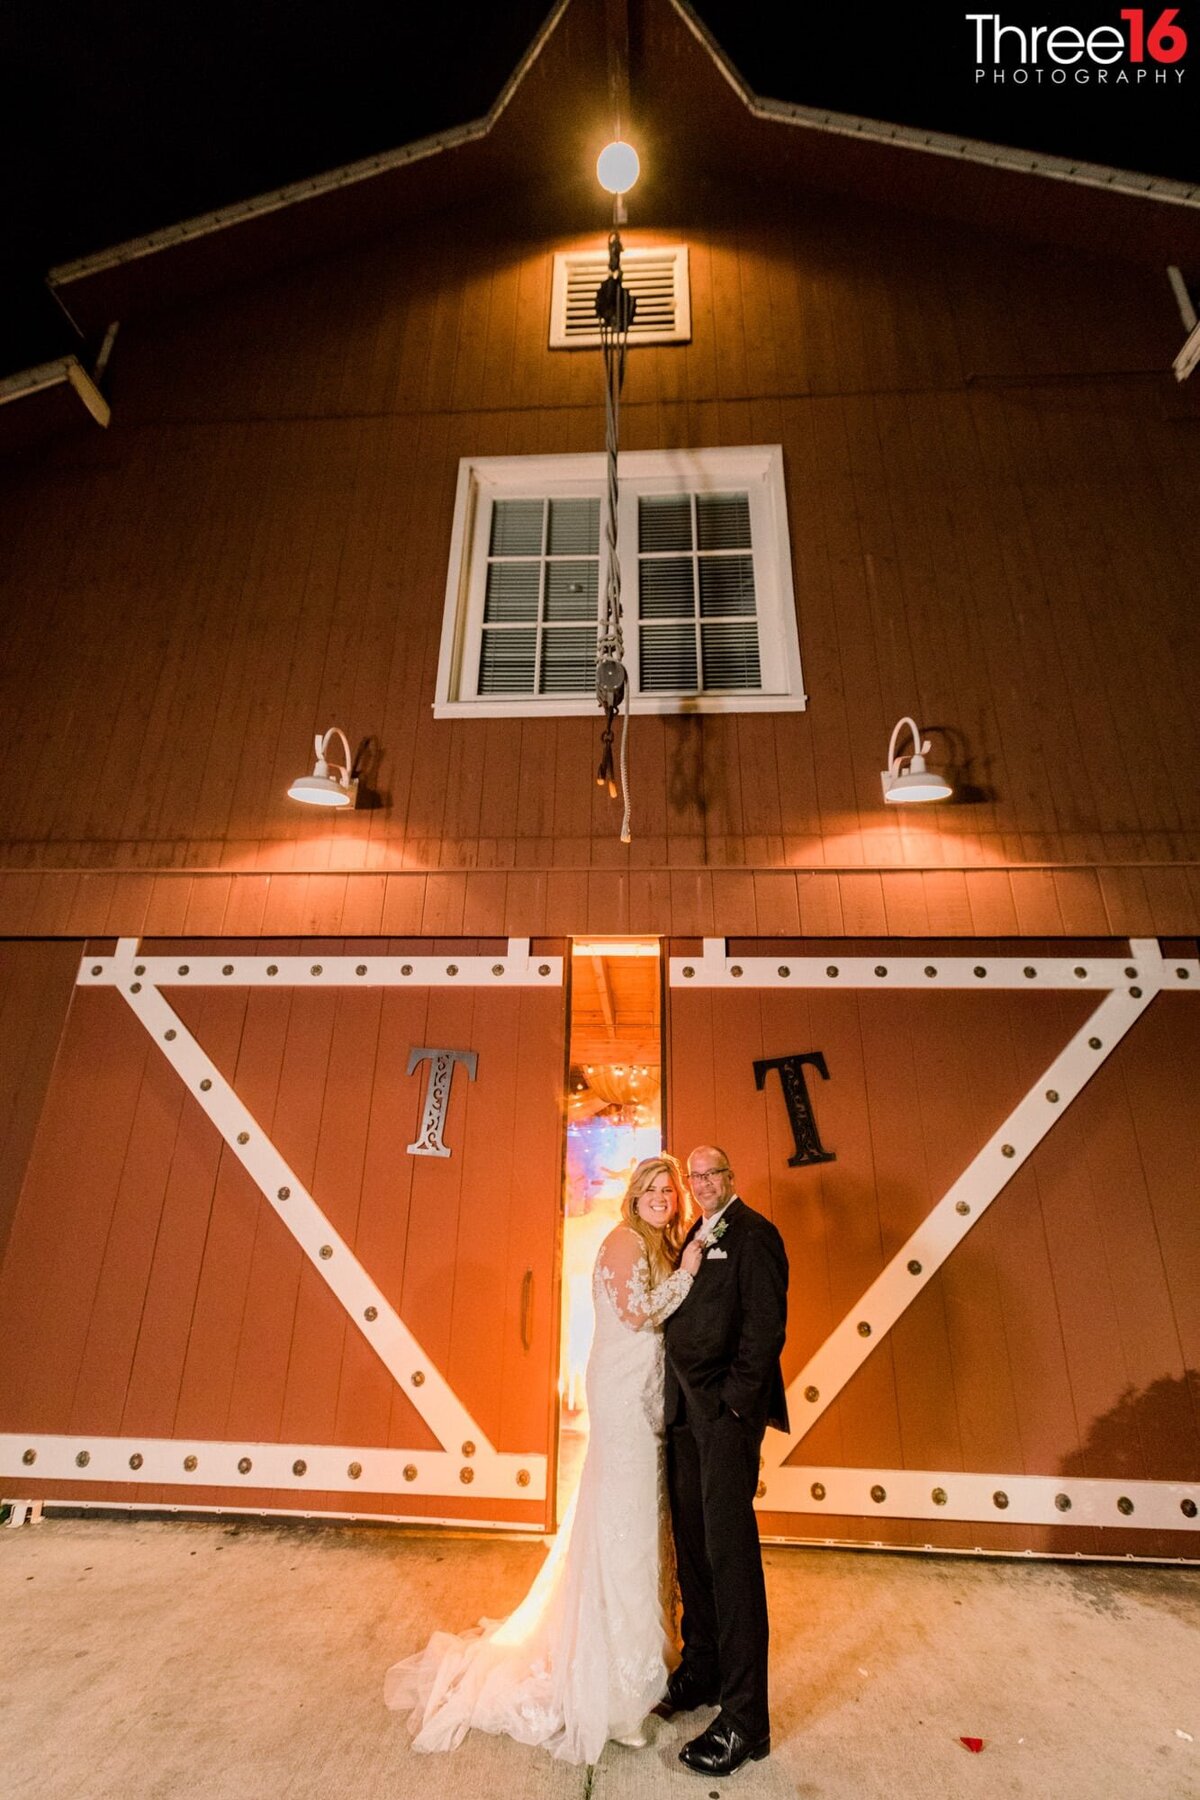 Newly married couple pose in front of barn doors